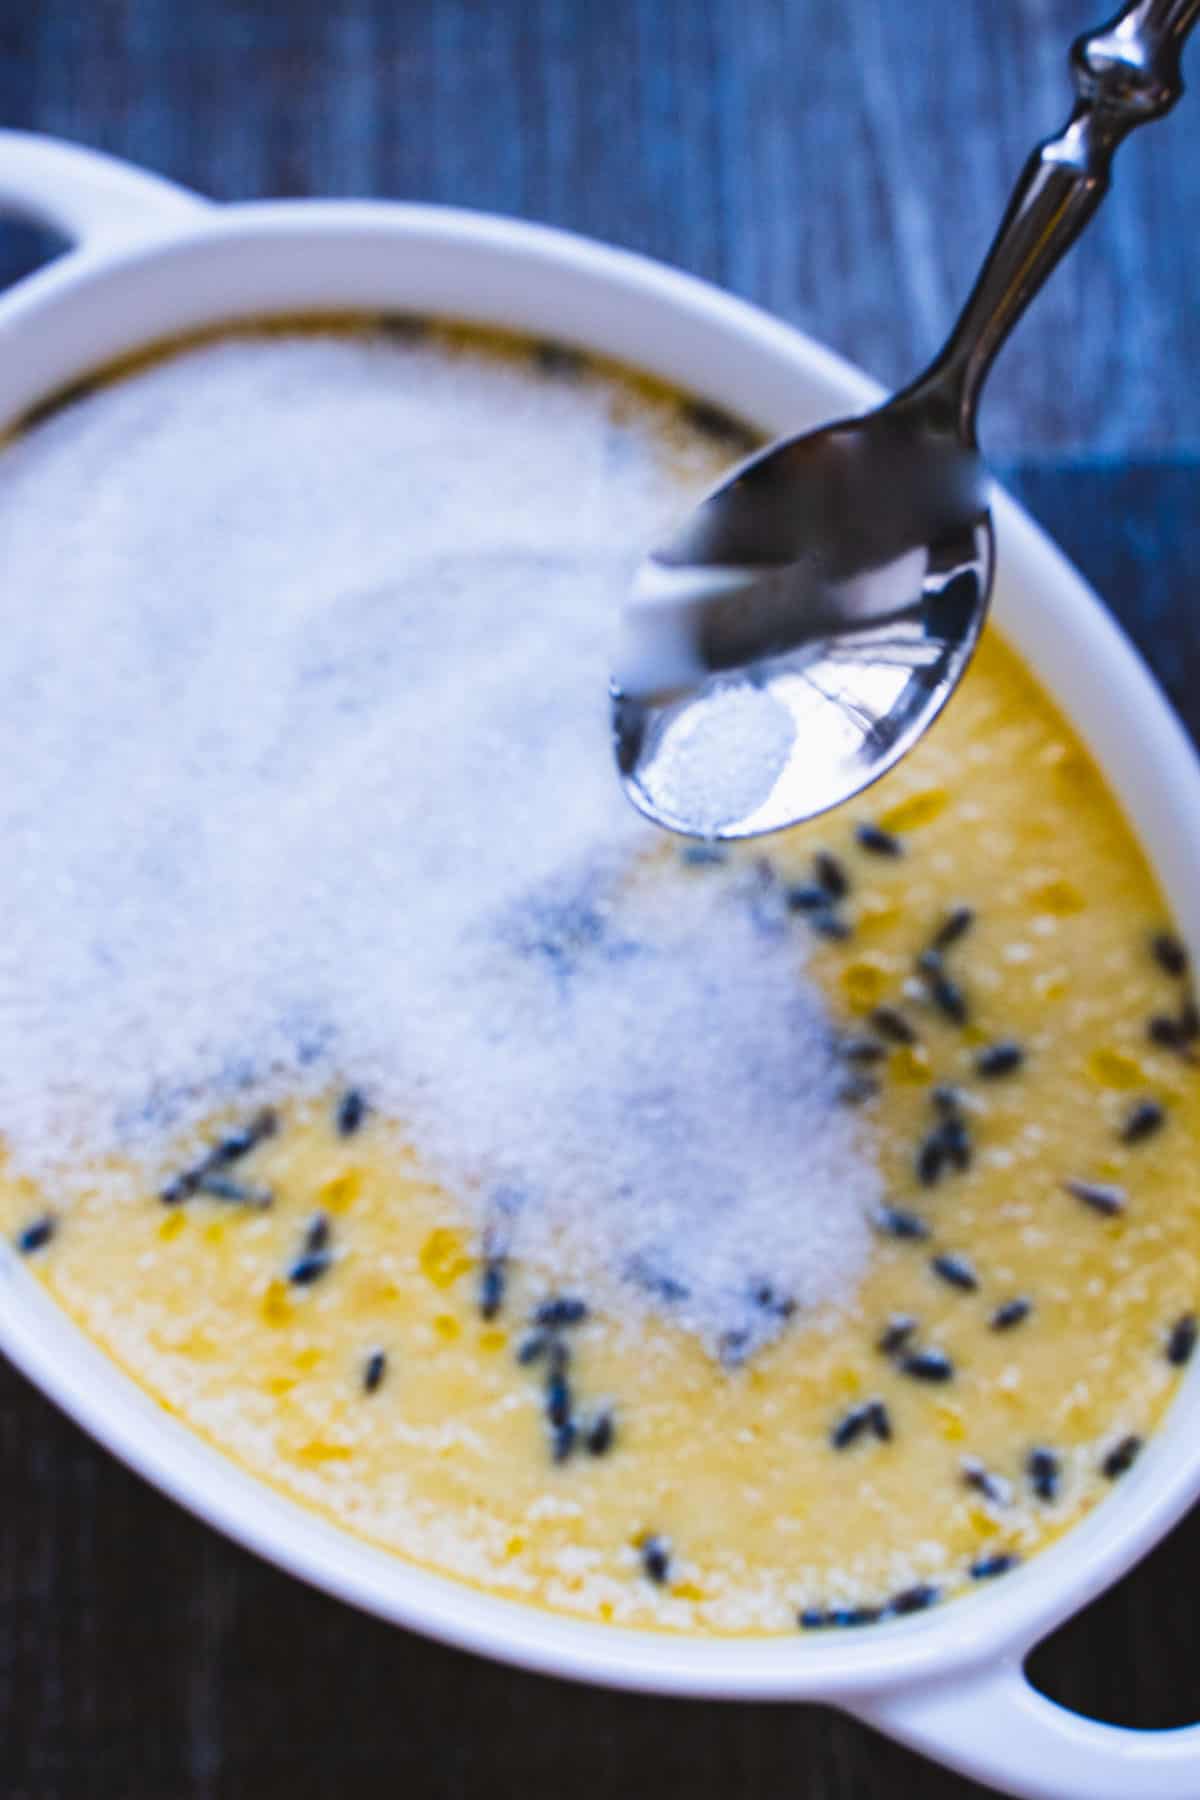 Sugar being sprinkled over the top of a baked creme brulee with a spoon.